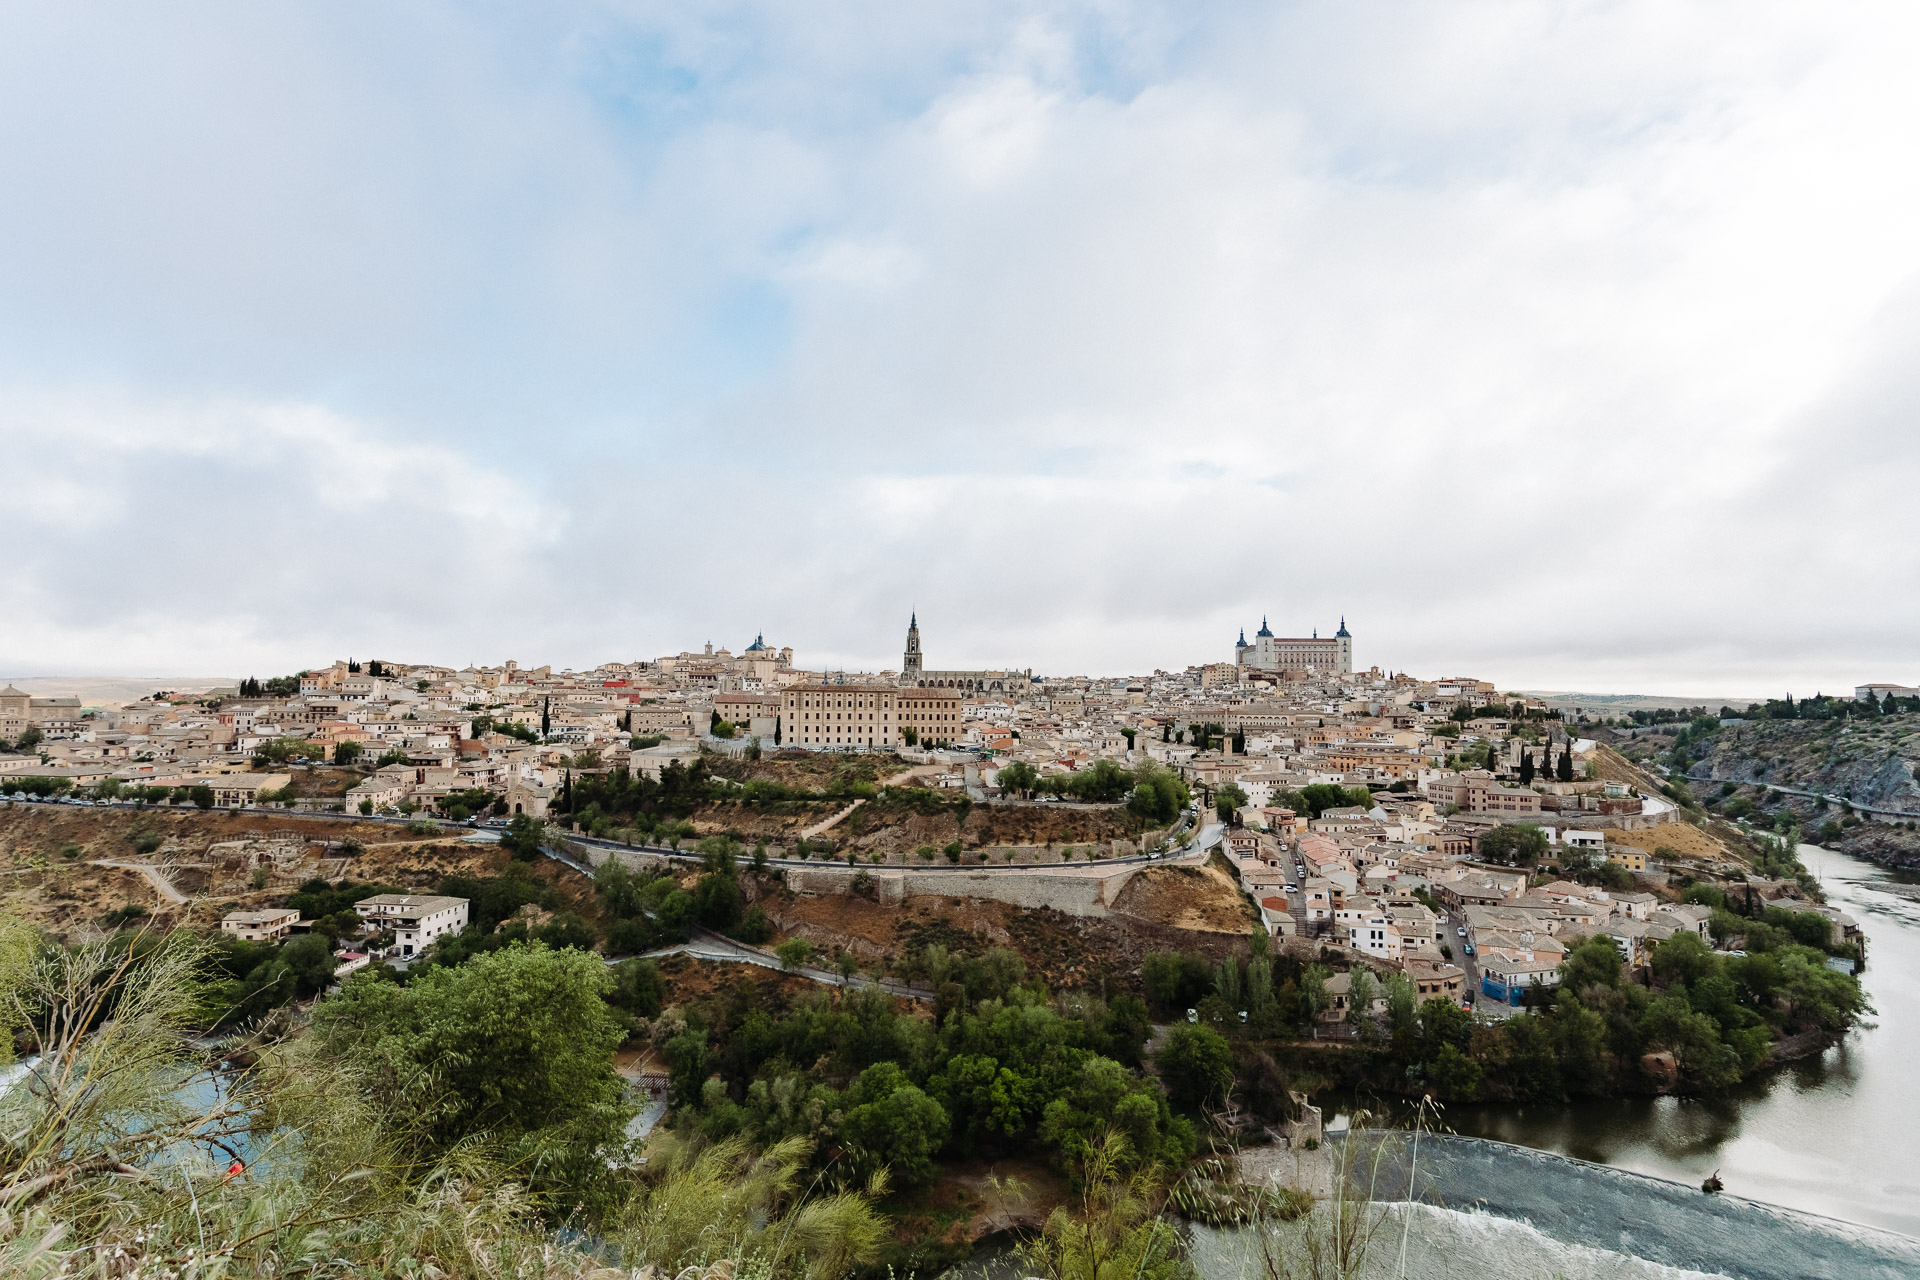 Toledo city center viewpoint with the Tagus River, cathedral, and other buildings